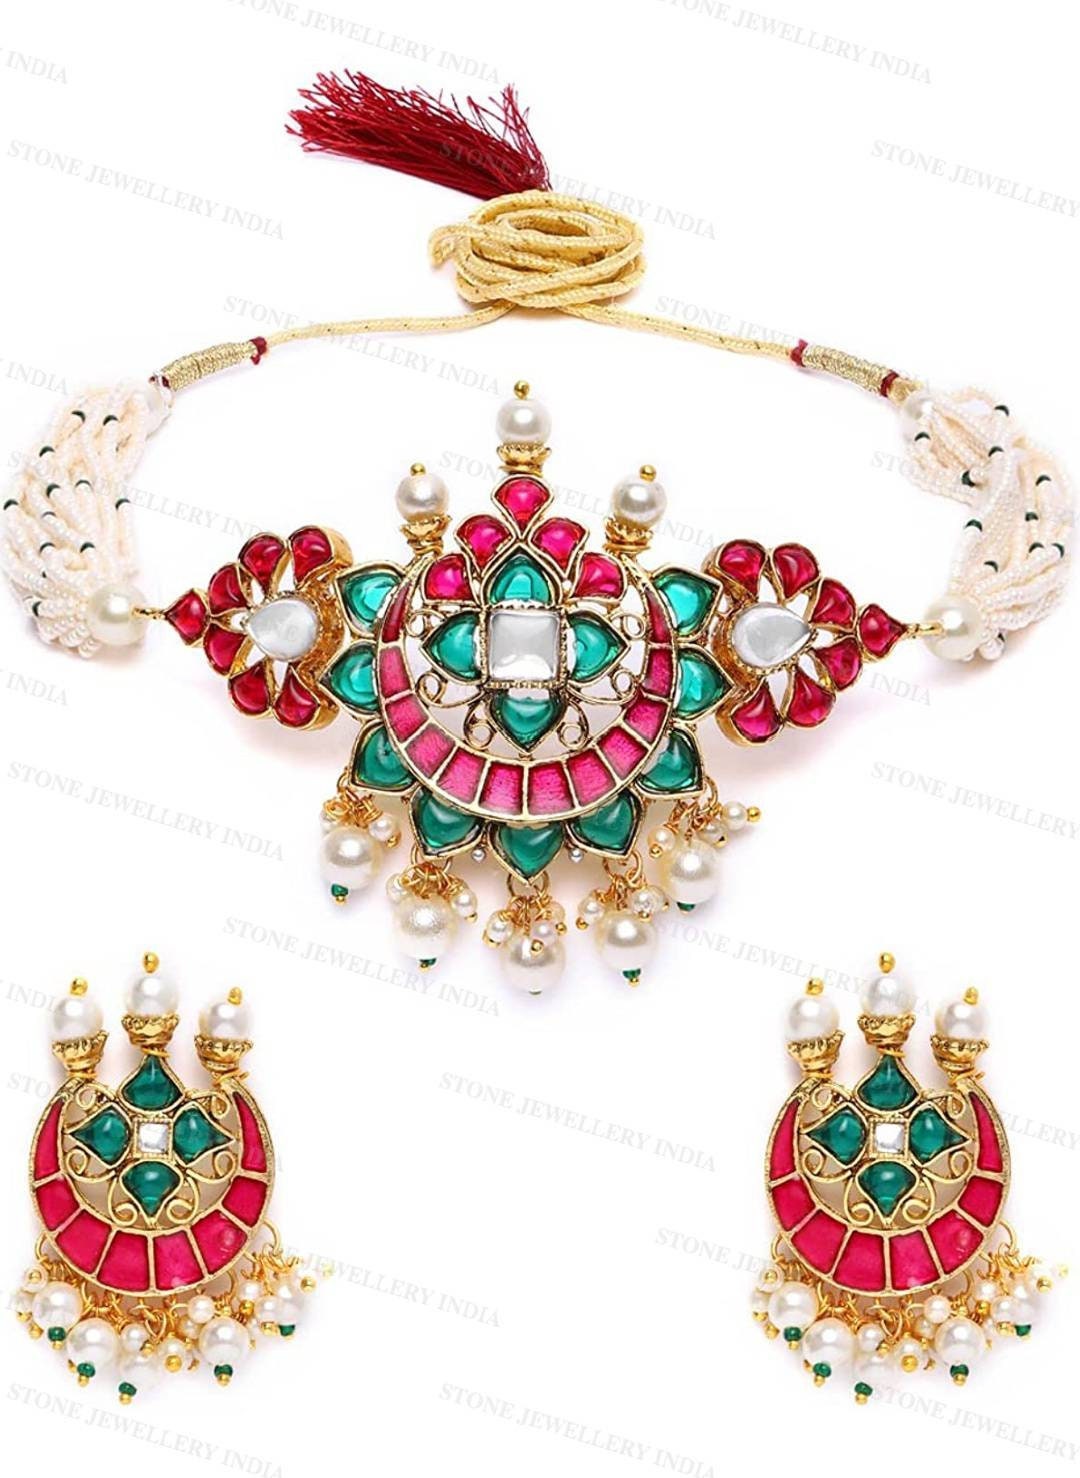 Indian Kundan Choker/ Indian Jewelry/ Indian Necklace/ Indian Choker/ Indian Wedding Necklace Set/ Kundan Choker/Party Wear Set, Multicolor | Save 33% - Rajasthan Living 12